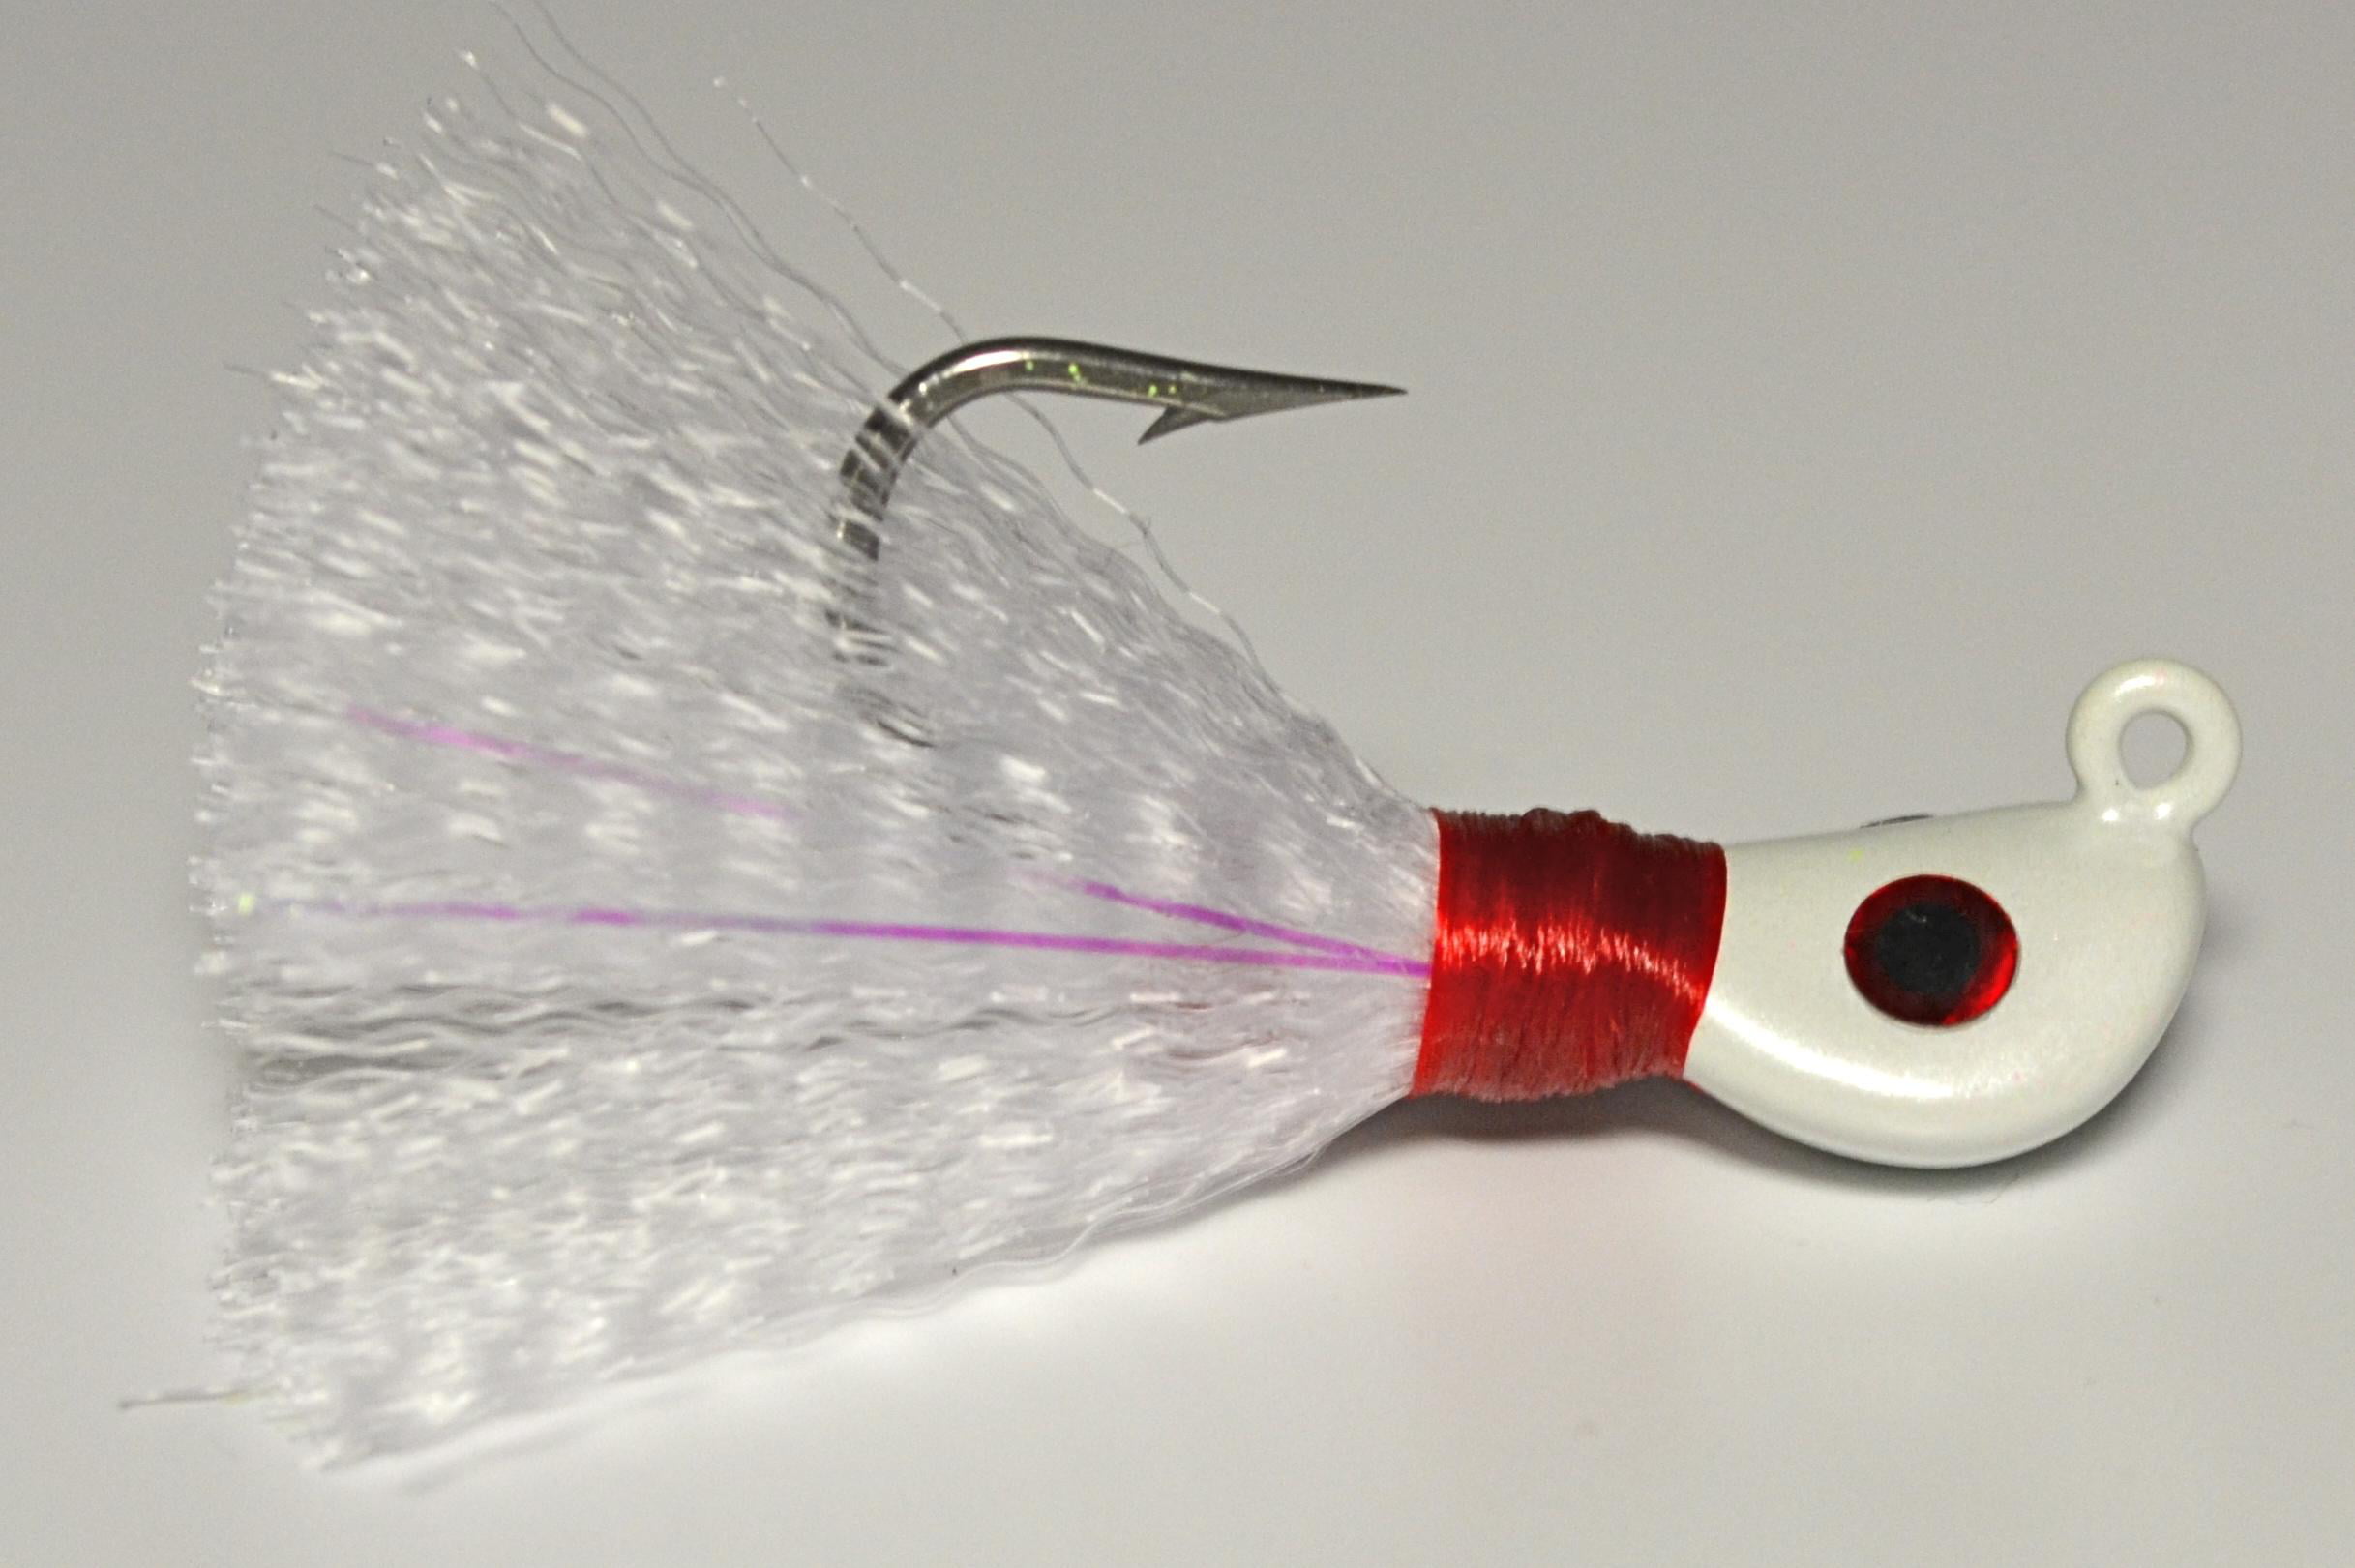 Hookup 212-03 SynTail X Pompano Jig 1/4 oz White And Red And White 2 Per  Pack 